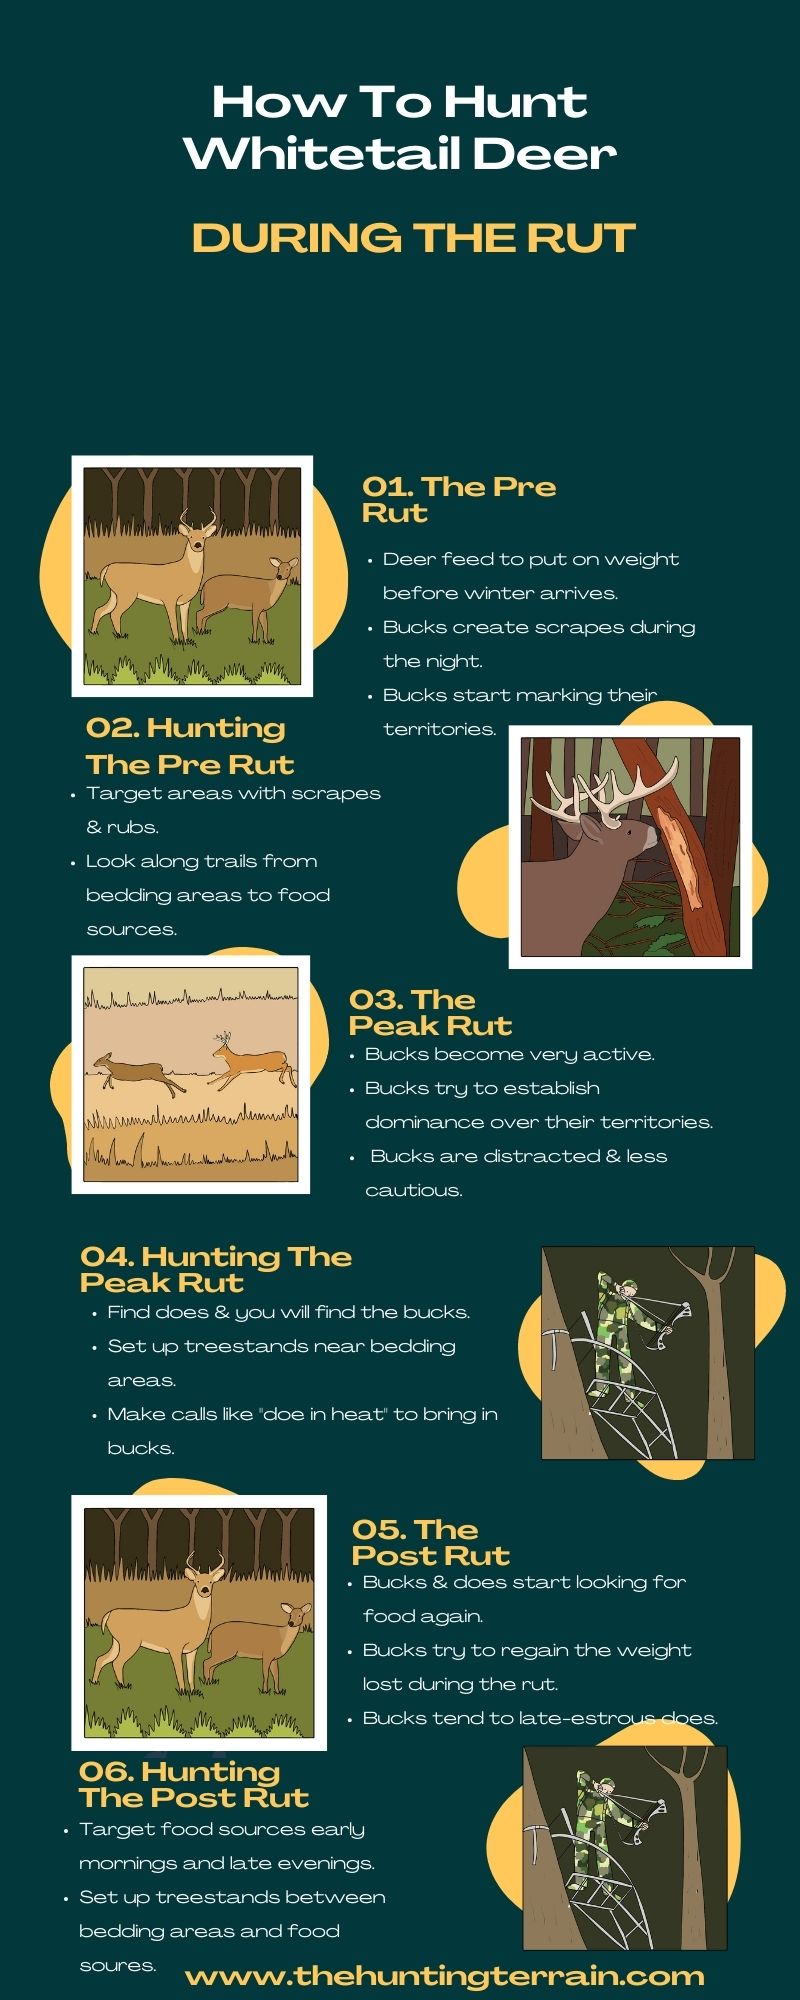 How To Hunt Whitetail Deer During The Rut